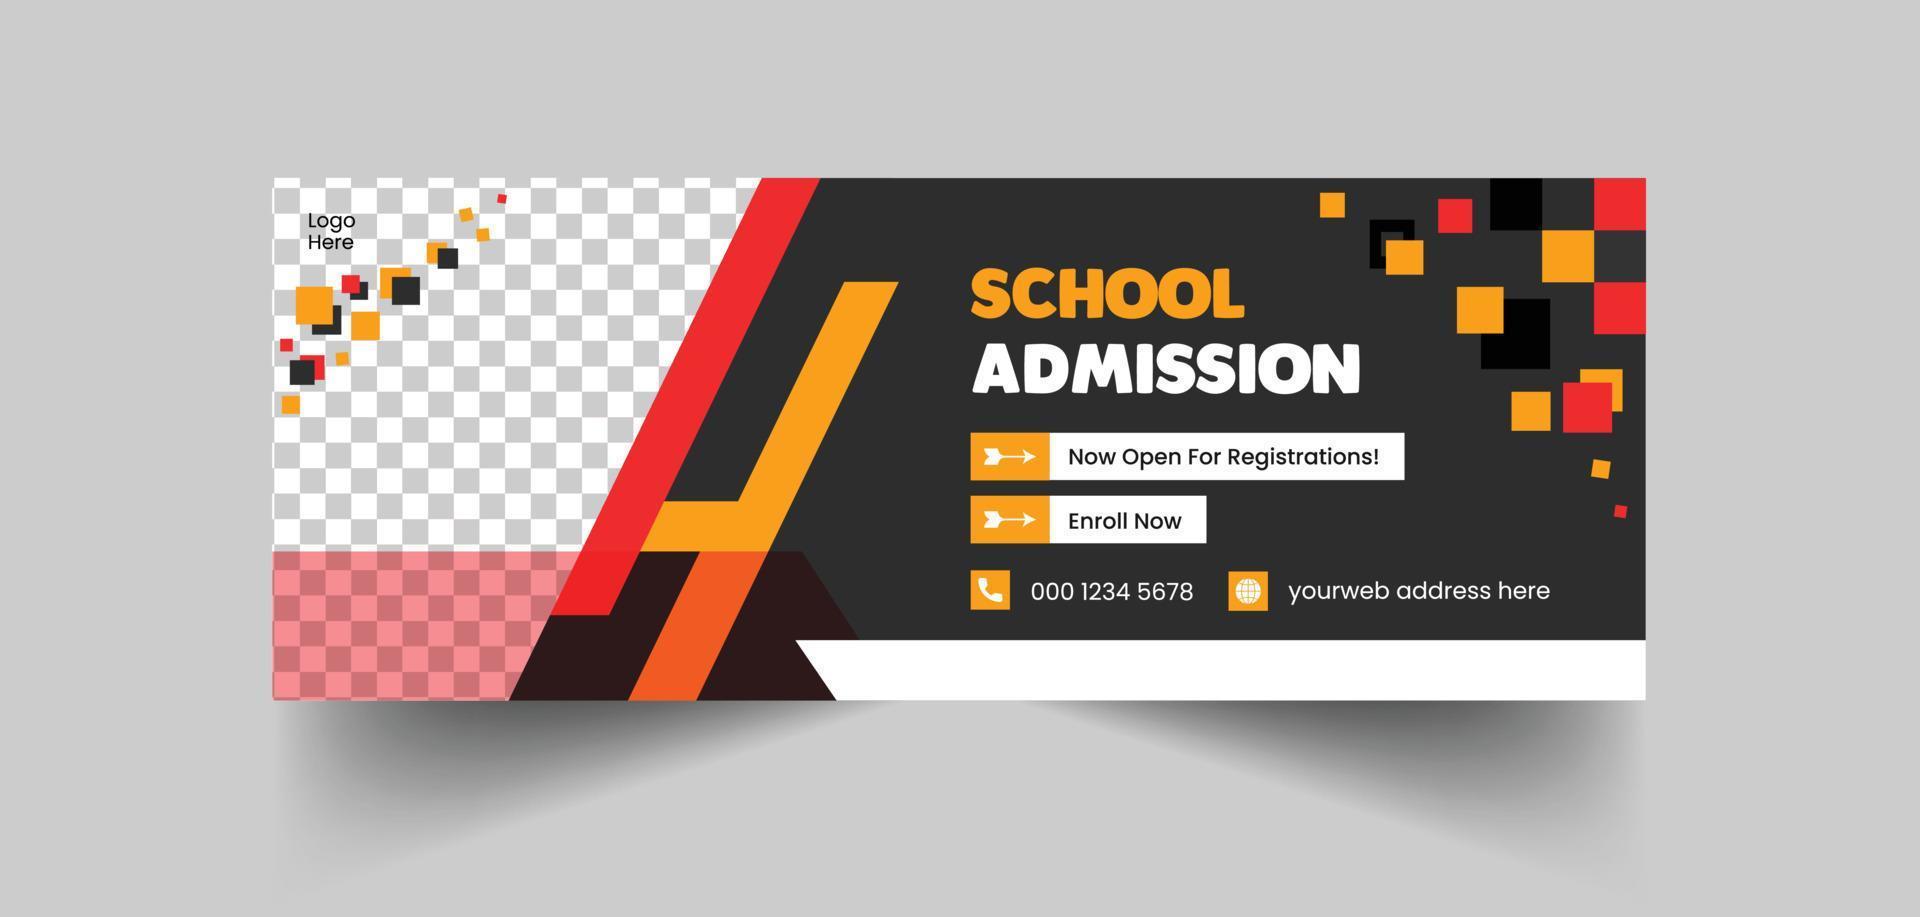 School admission social media cover banner design, school admission web banner template design, Back to school cover vector